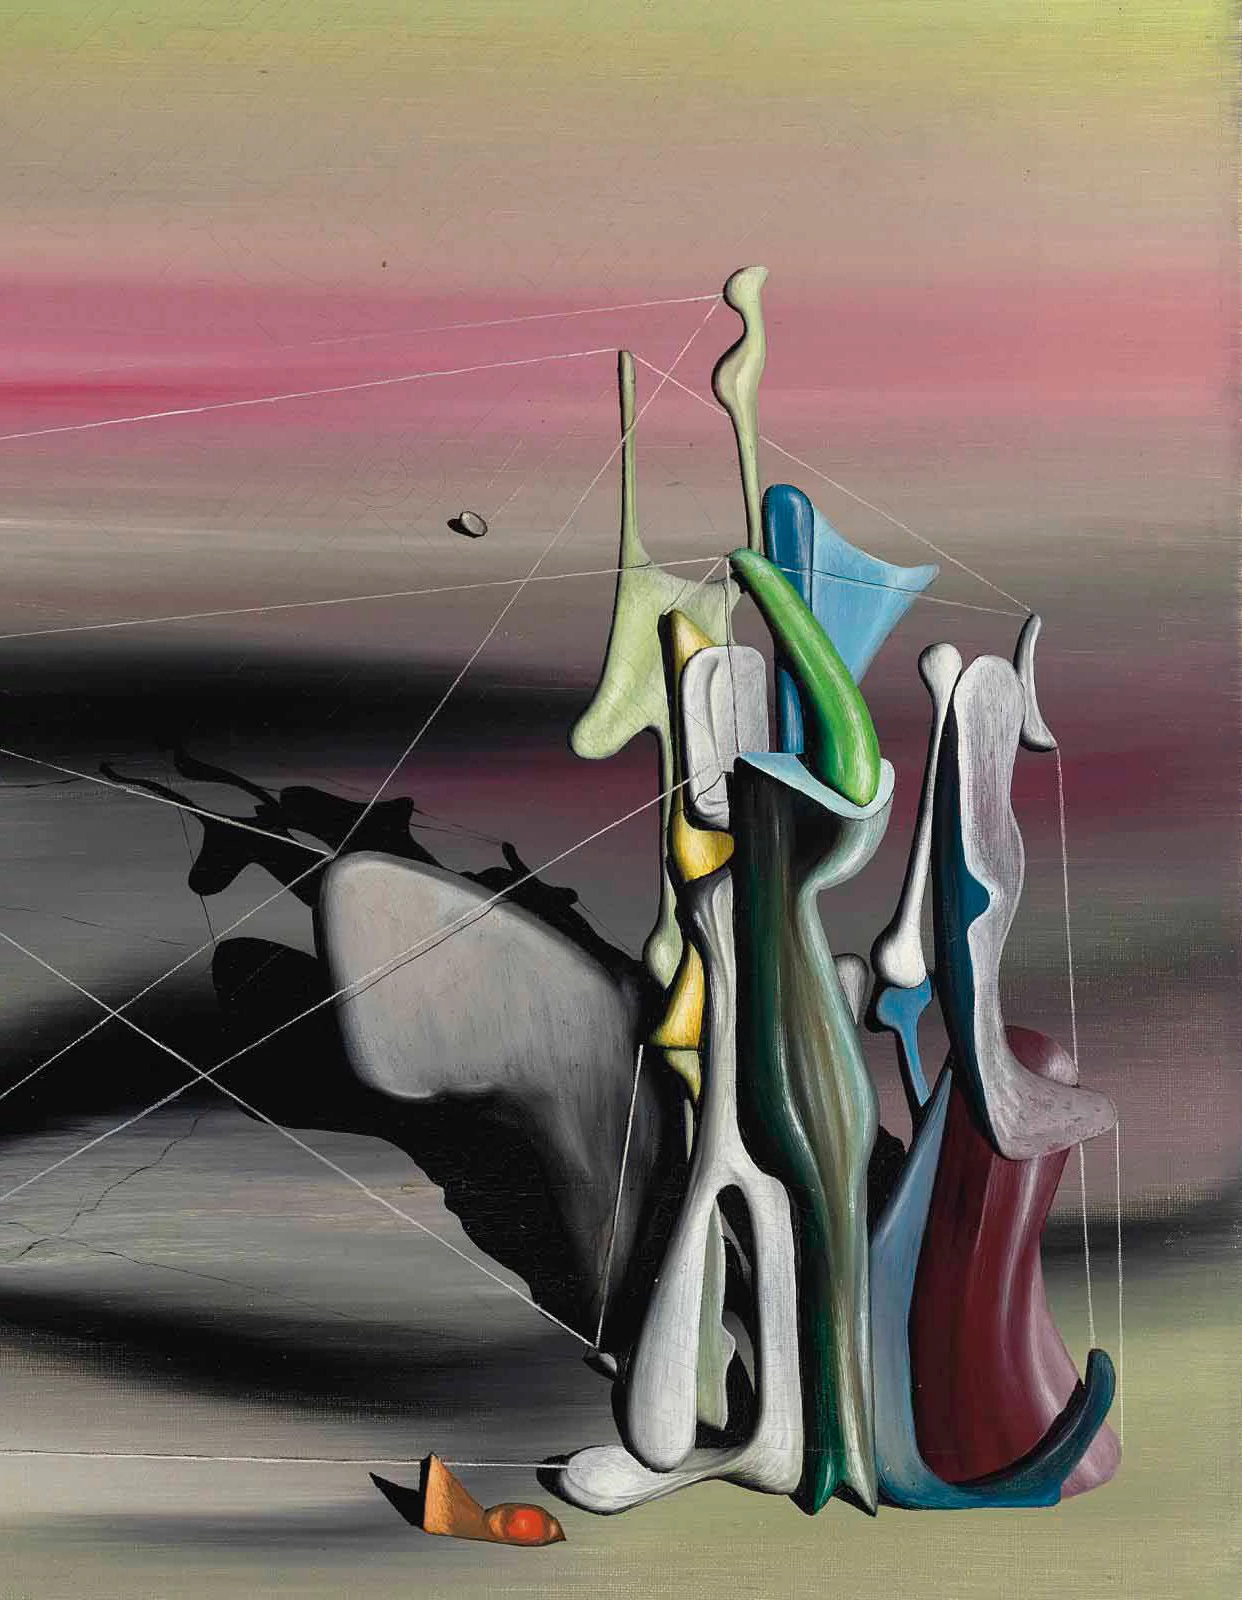 Abstract Figures, Themes in Art